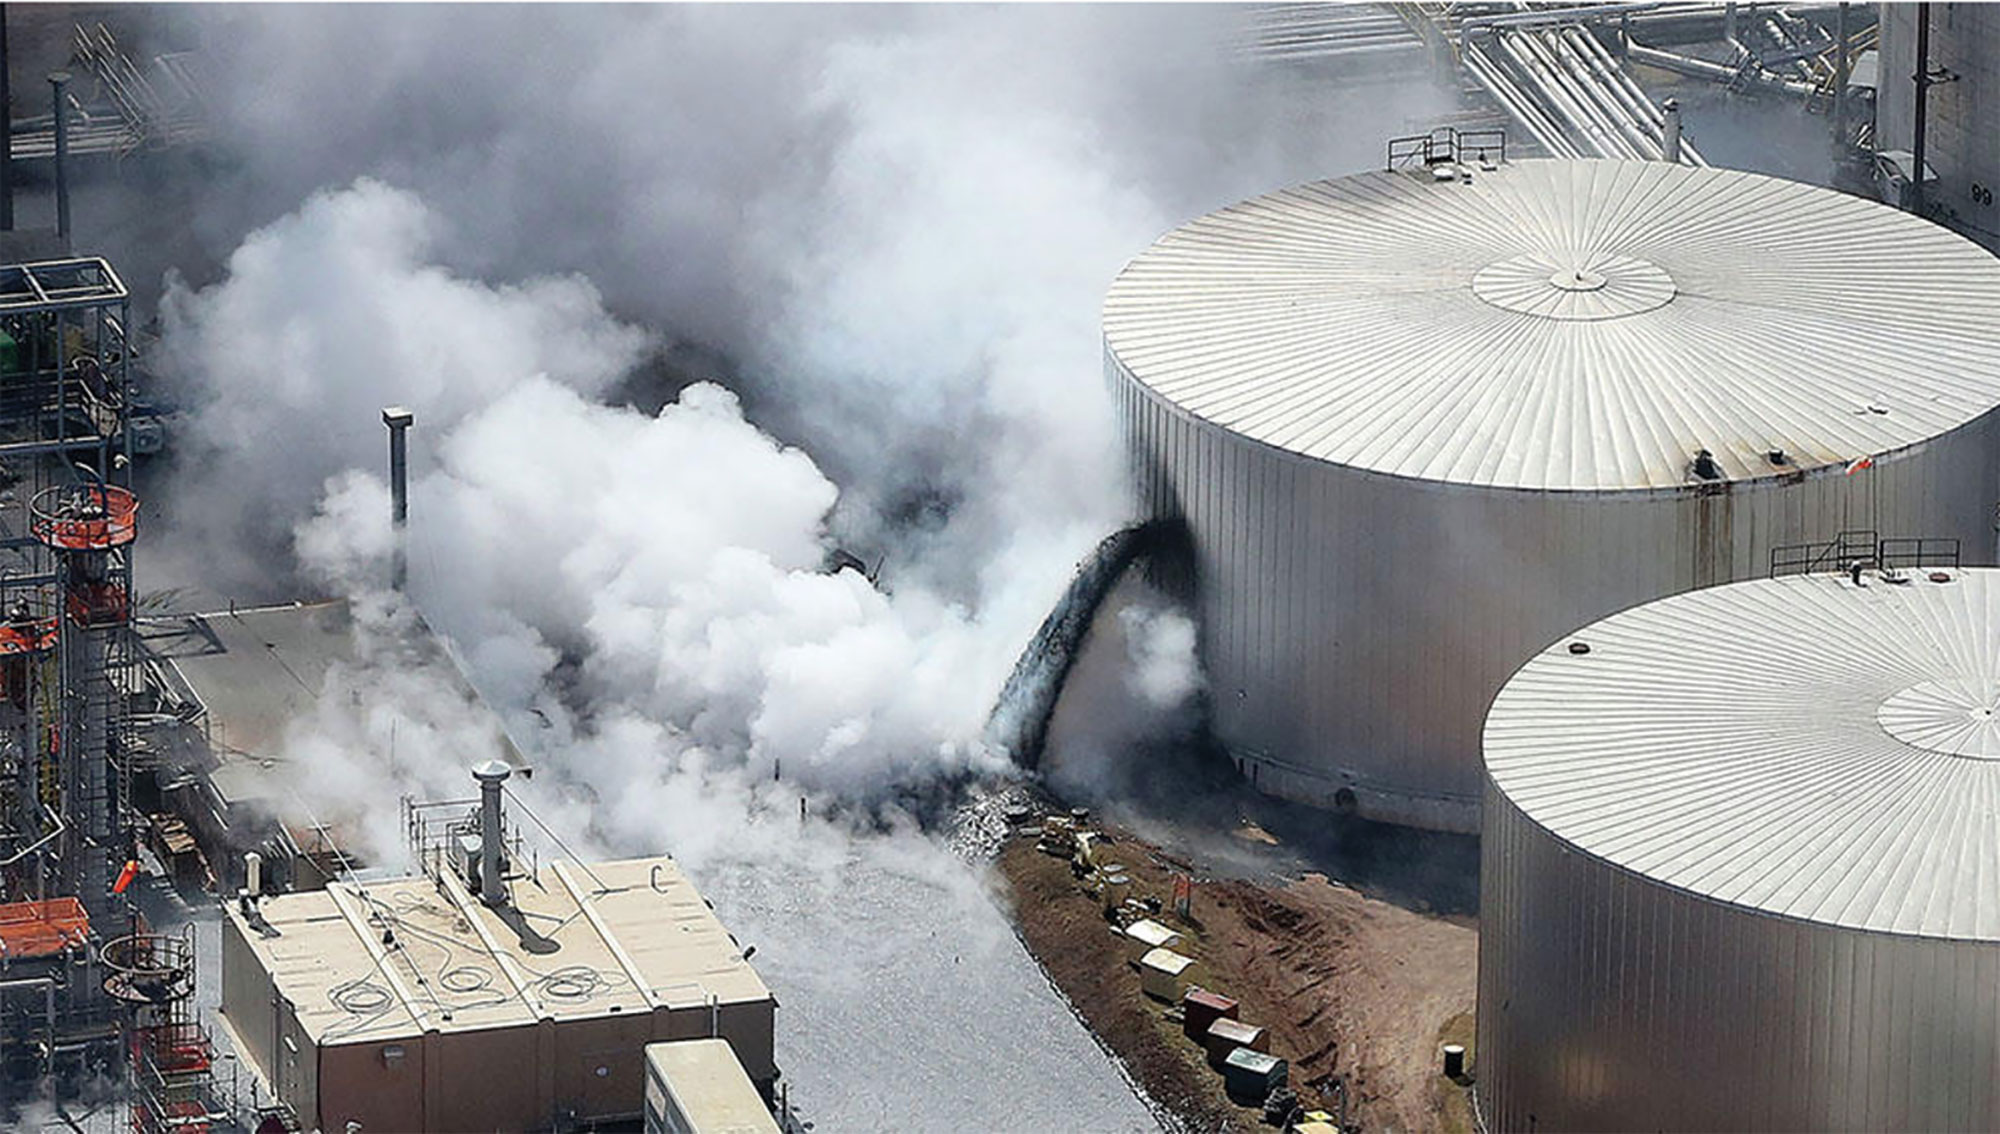 CSB issues video, factual update of Husky Superior refinery explosion.